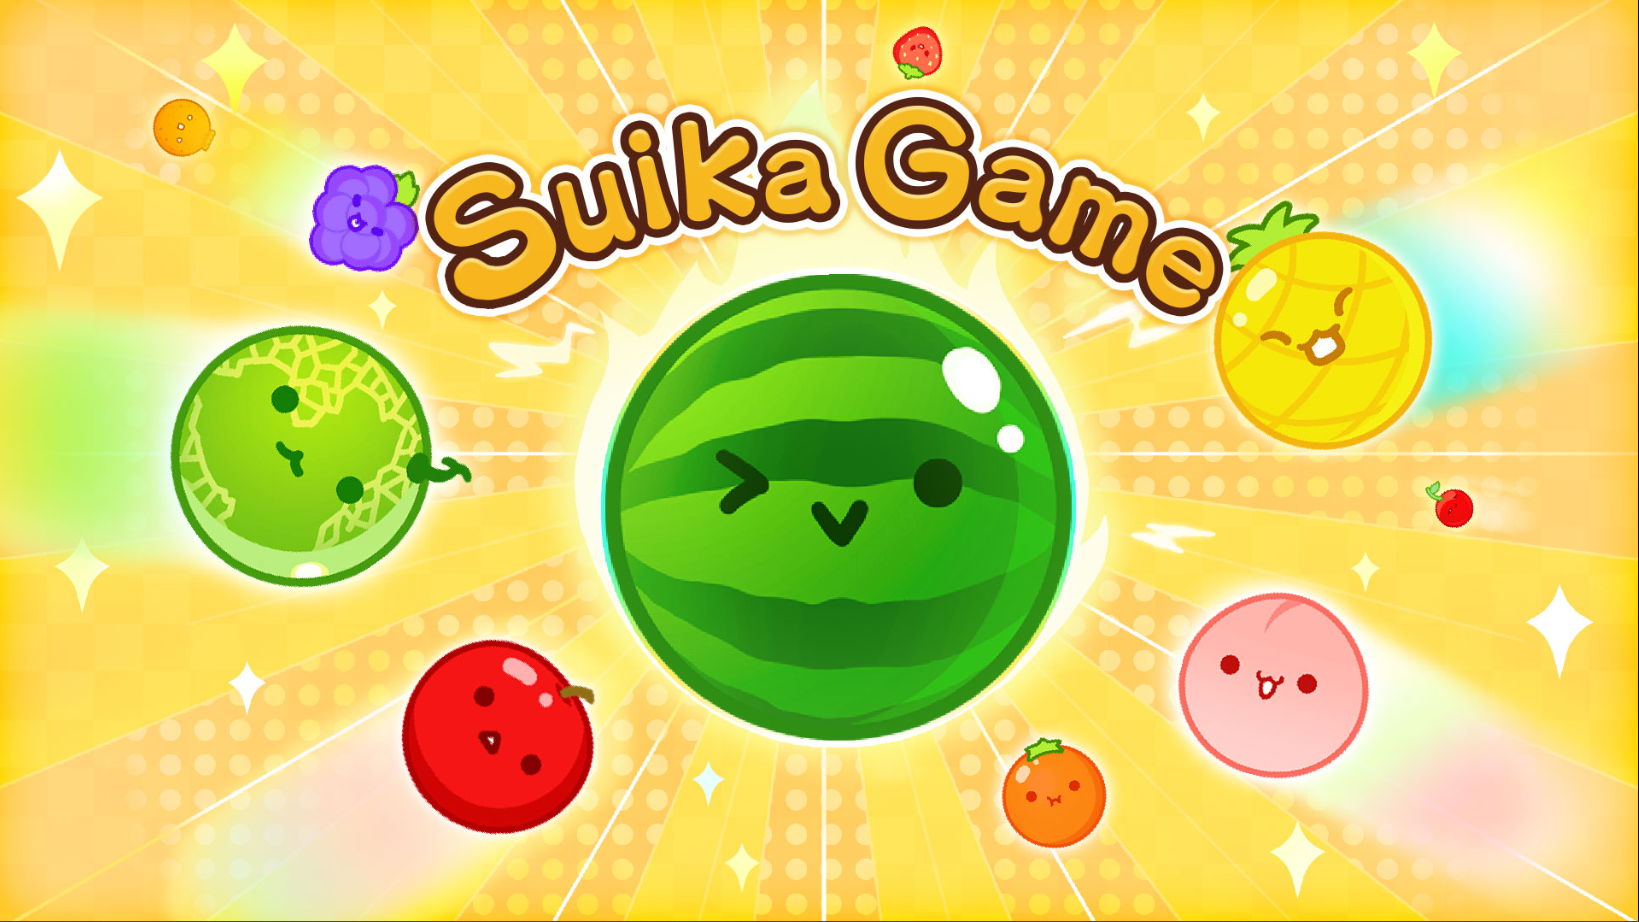 Suika Game Online - Play Suika Game Online On Getting Over It